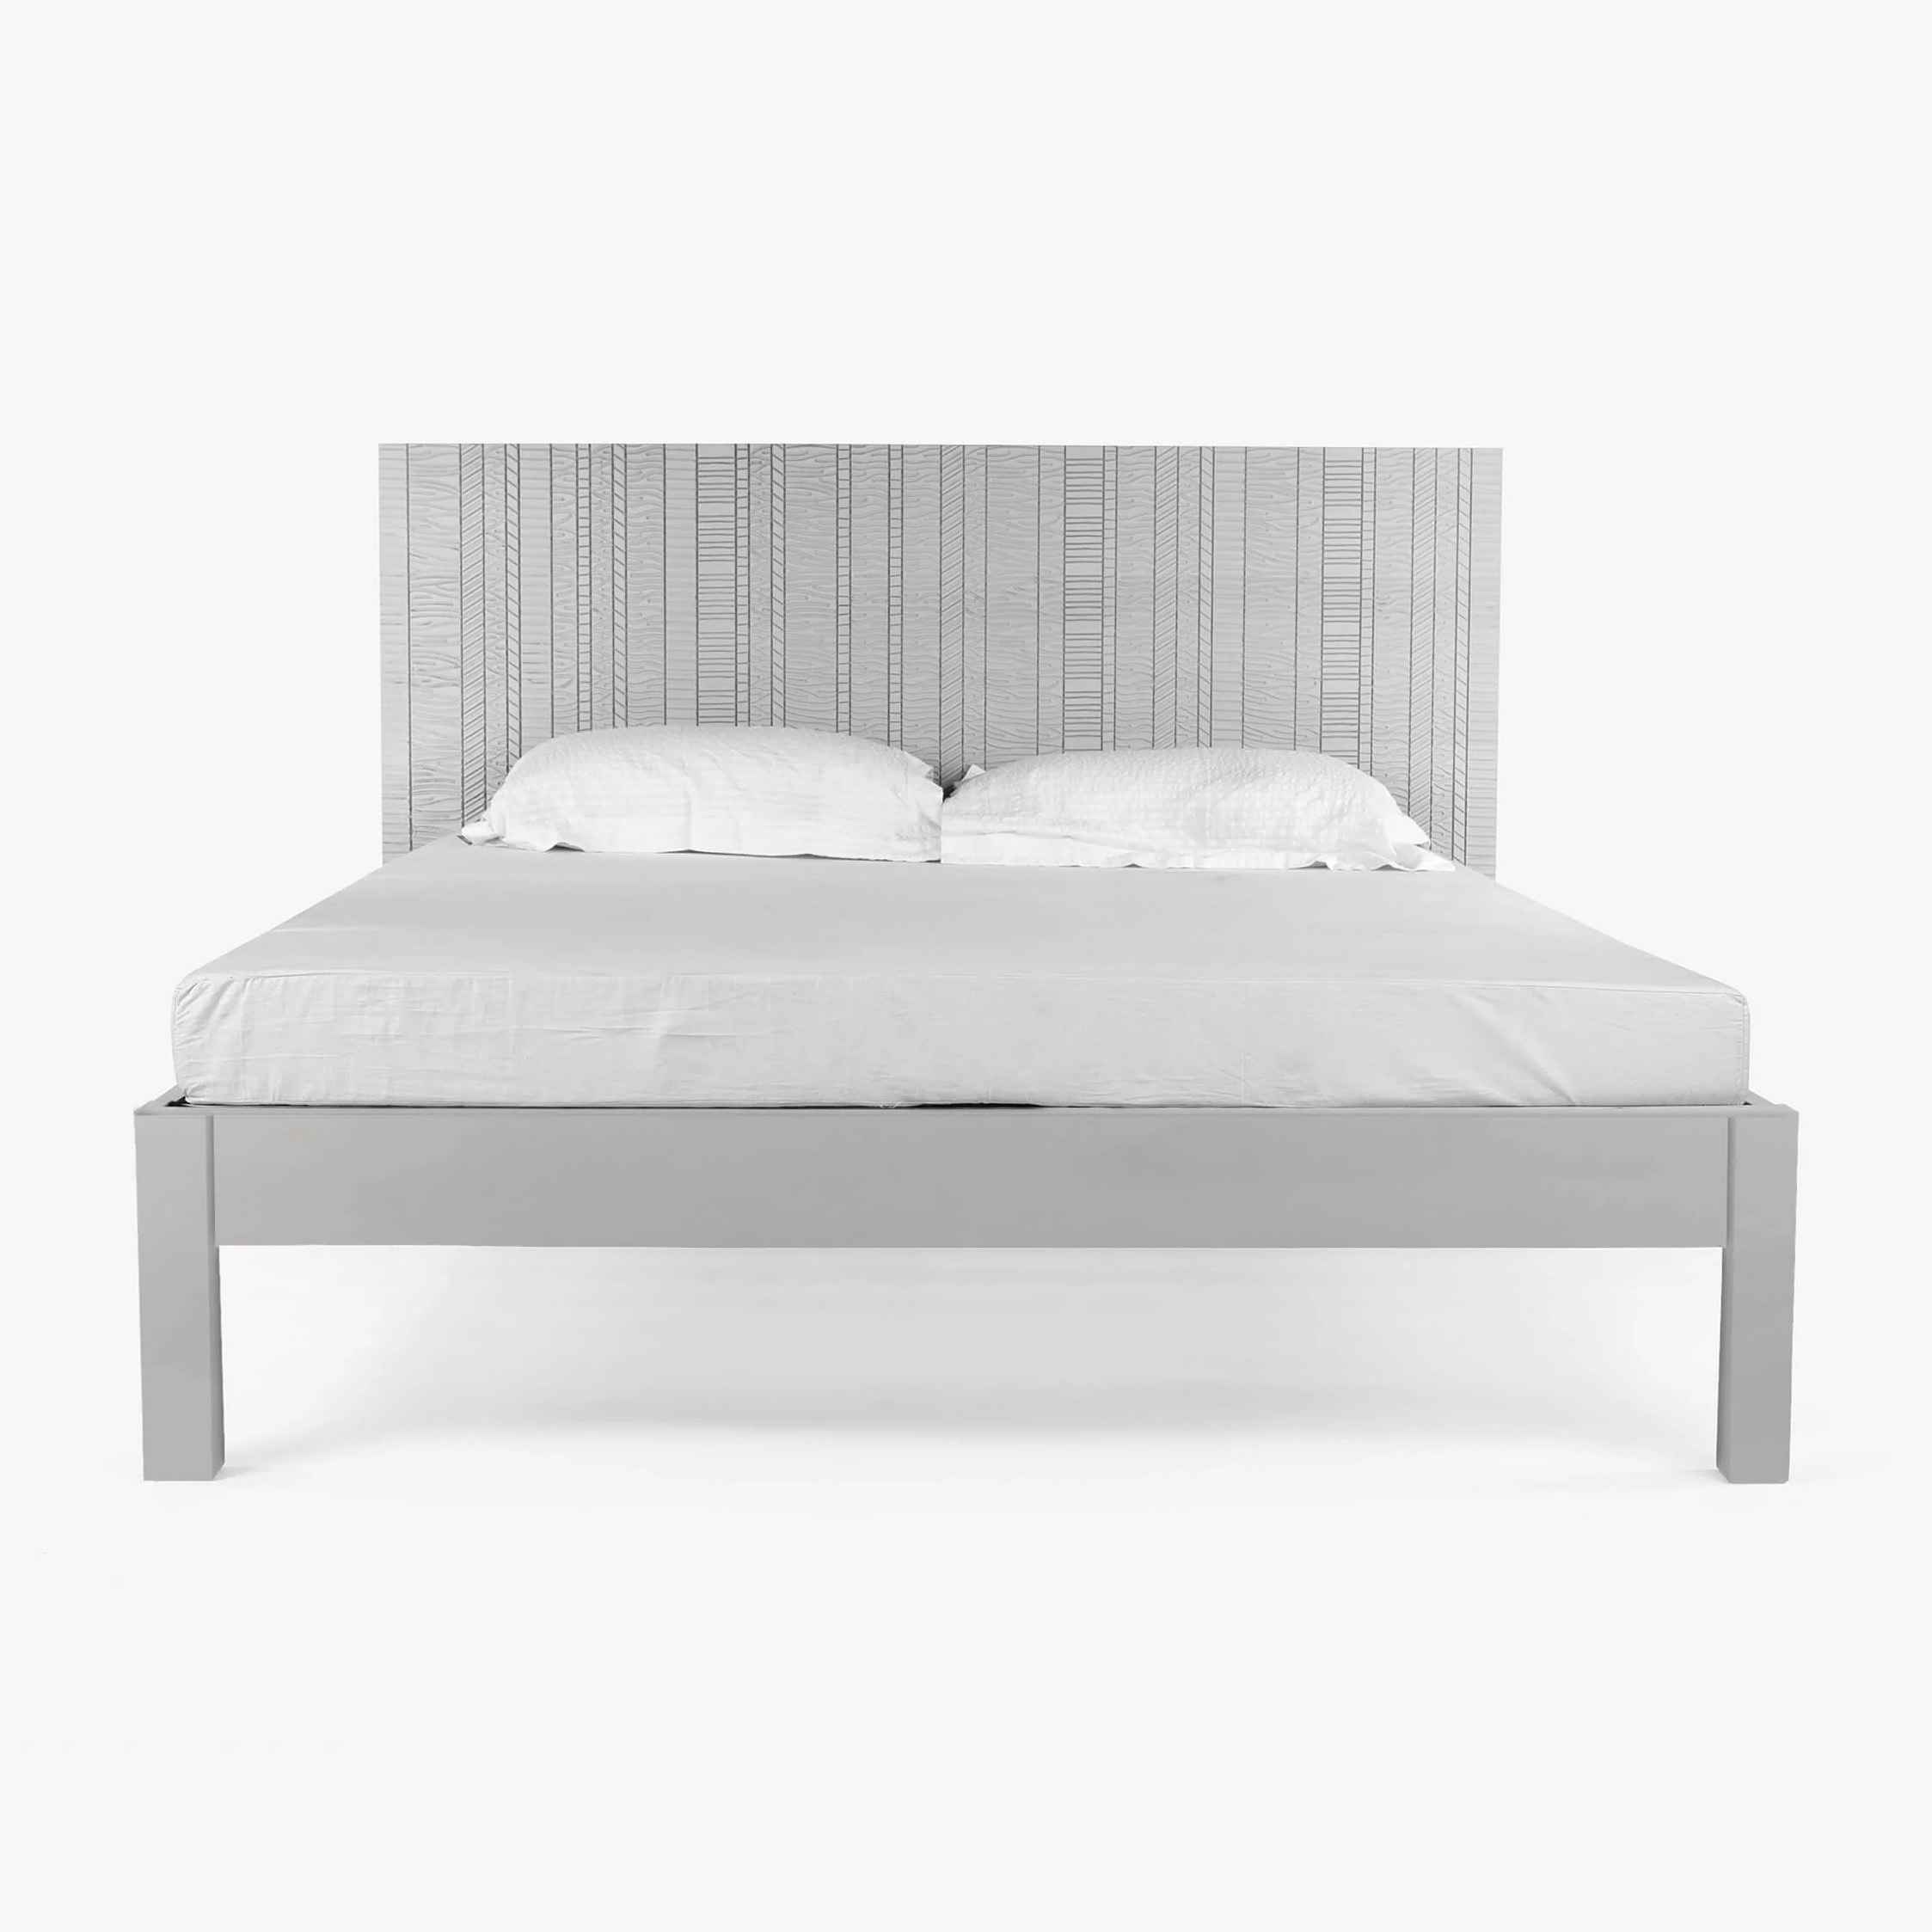 Toshi Queen Hydraulic Bed